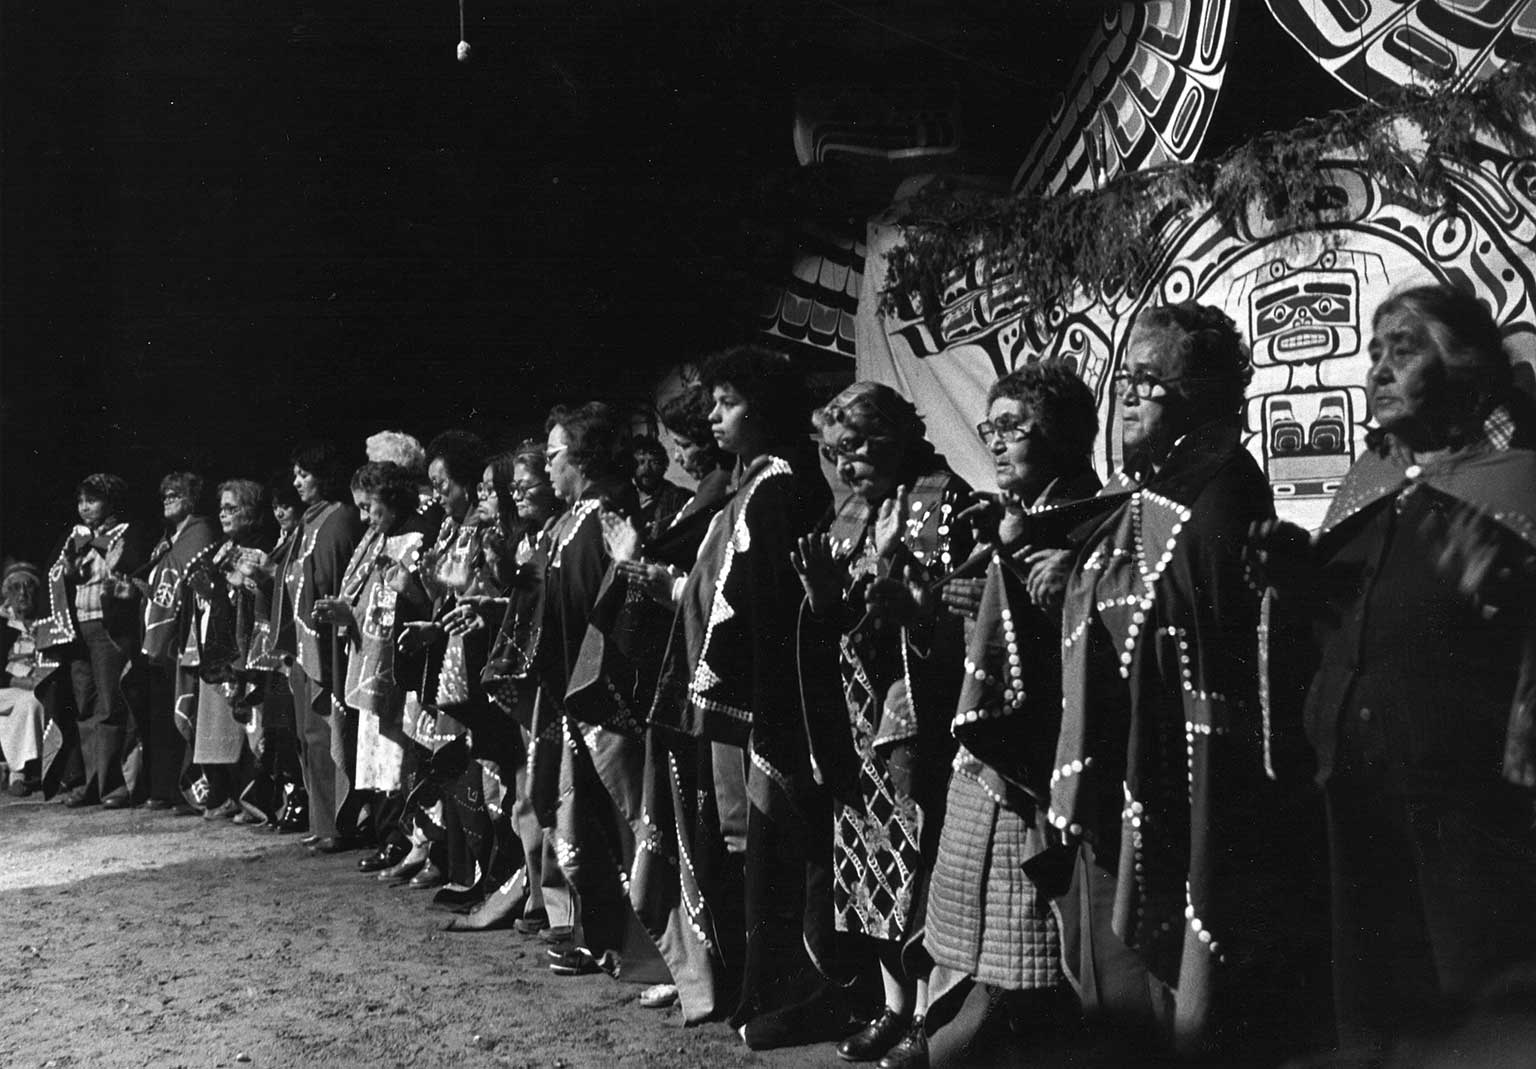 Black and white photograph of mourners in ceremonial regalia at a potlatch